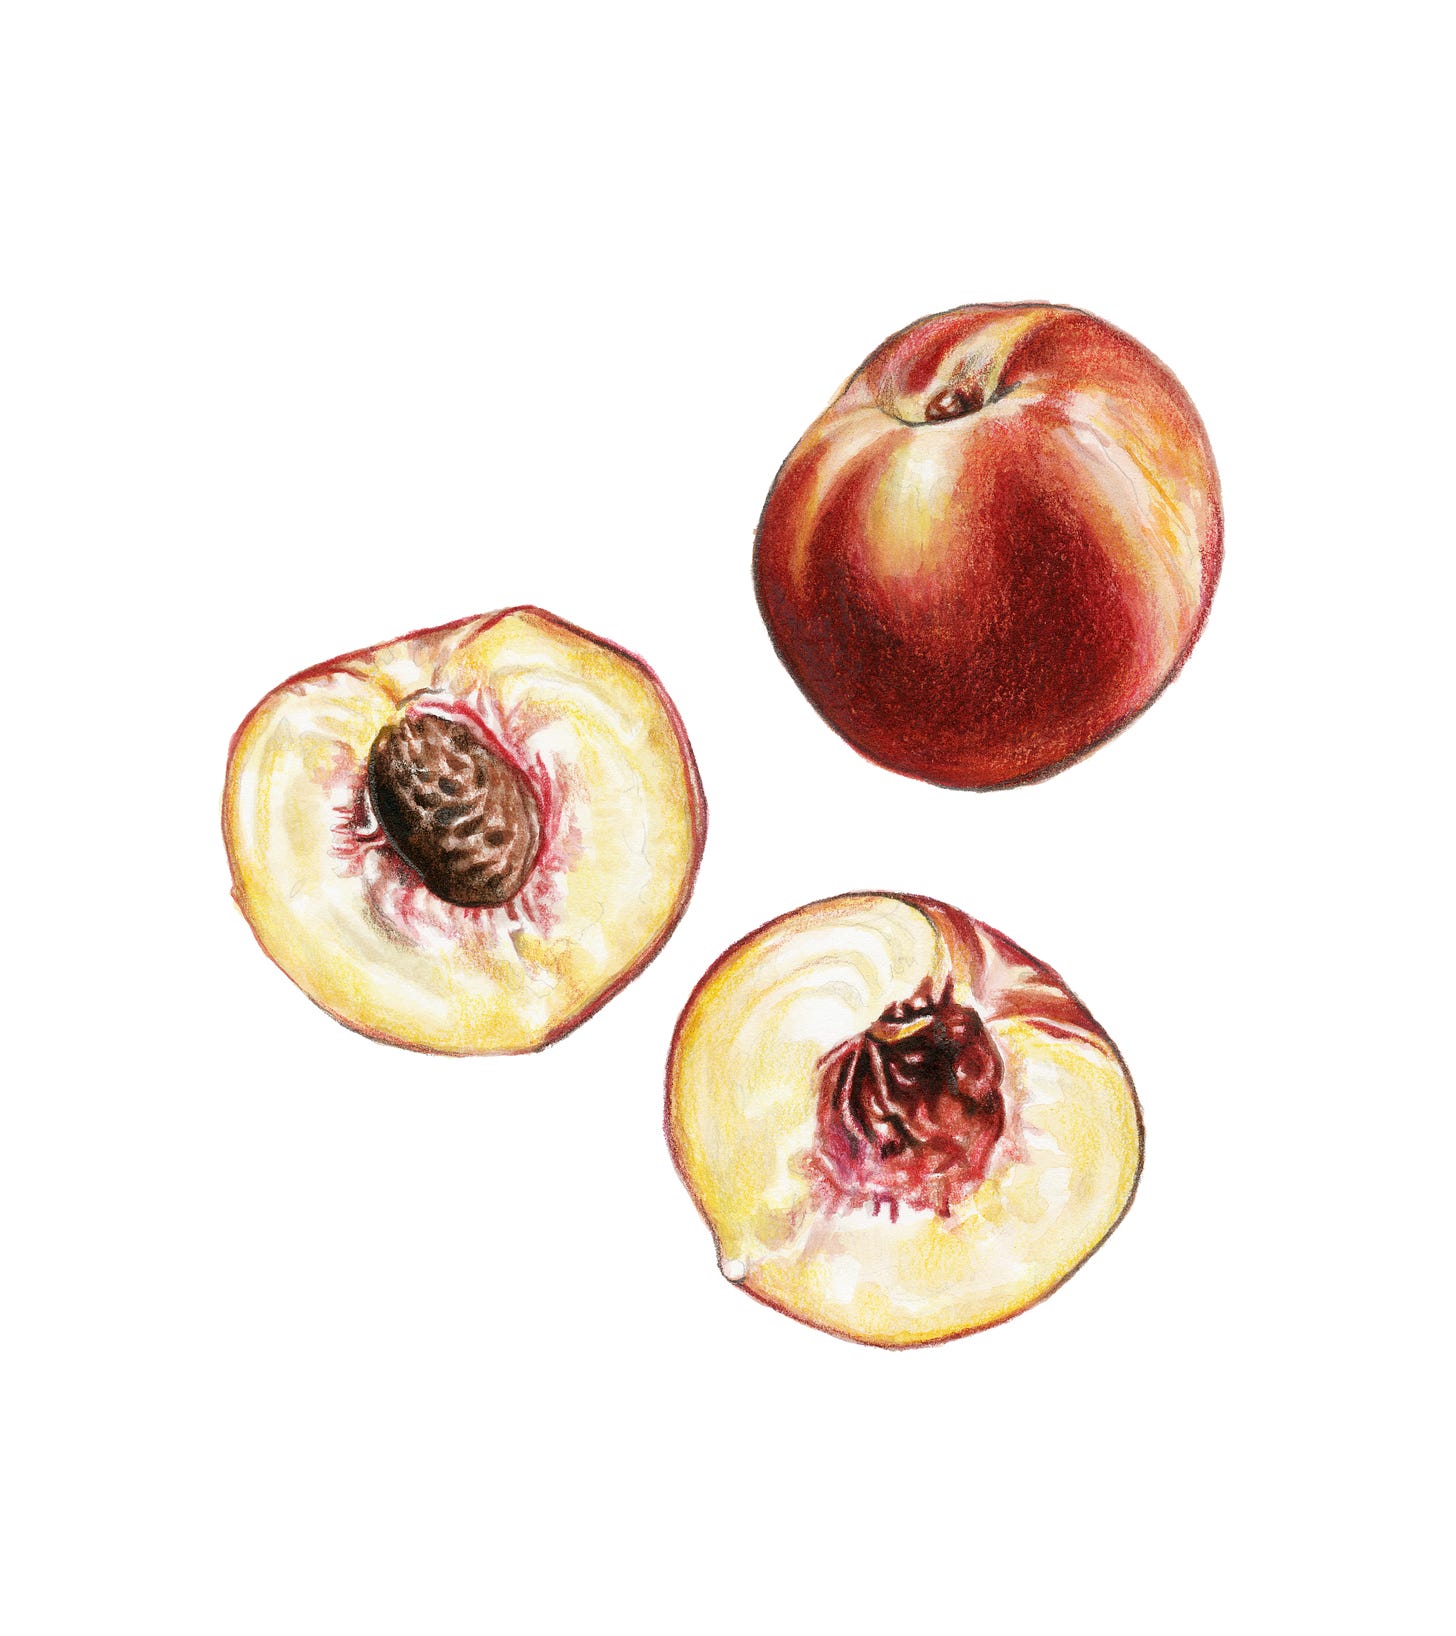 a painting of an open peach and a whole peach, against a blank background